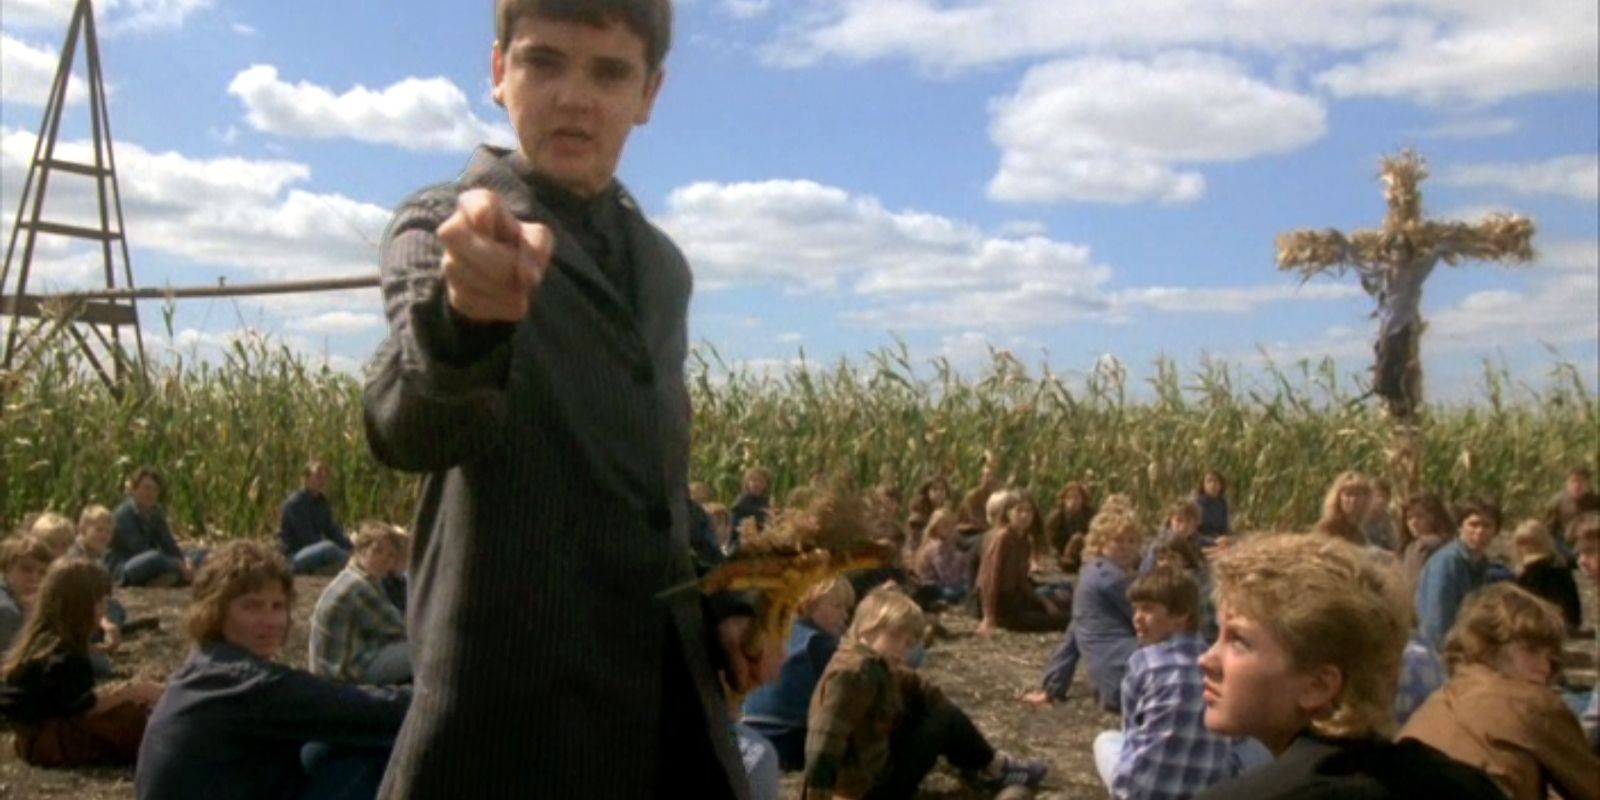 A still from the 1984 Stephen King movie Children of the Corn.